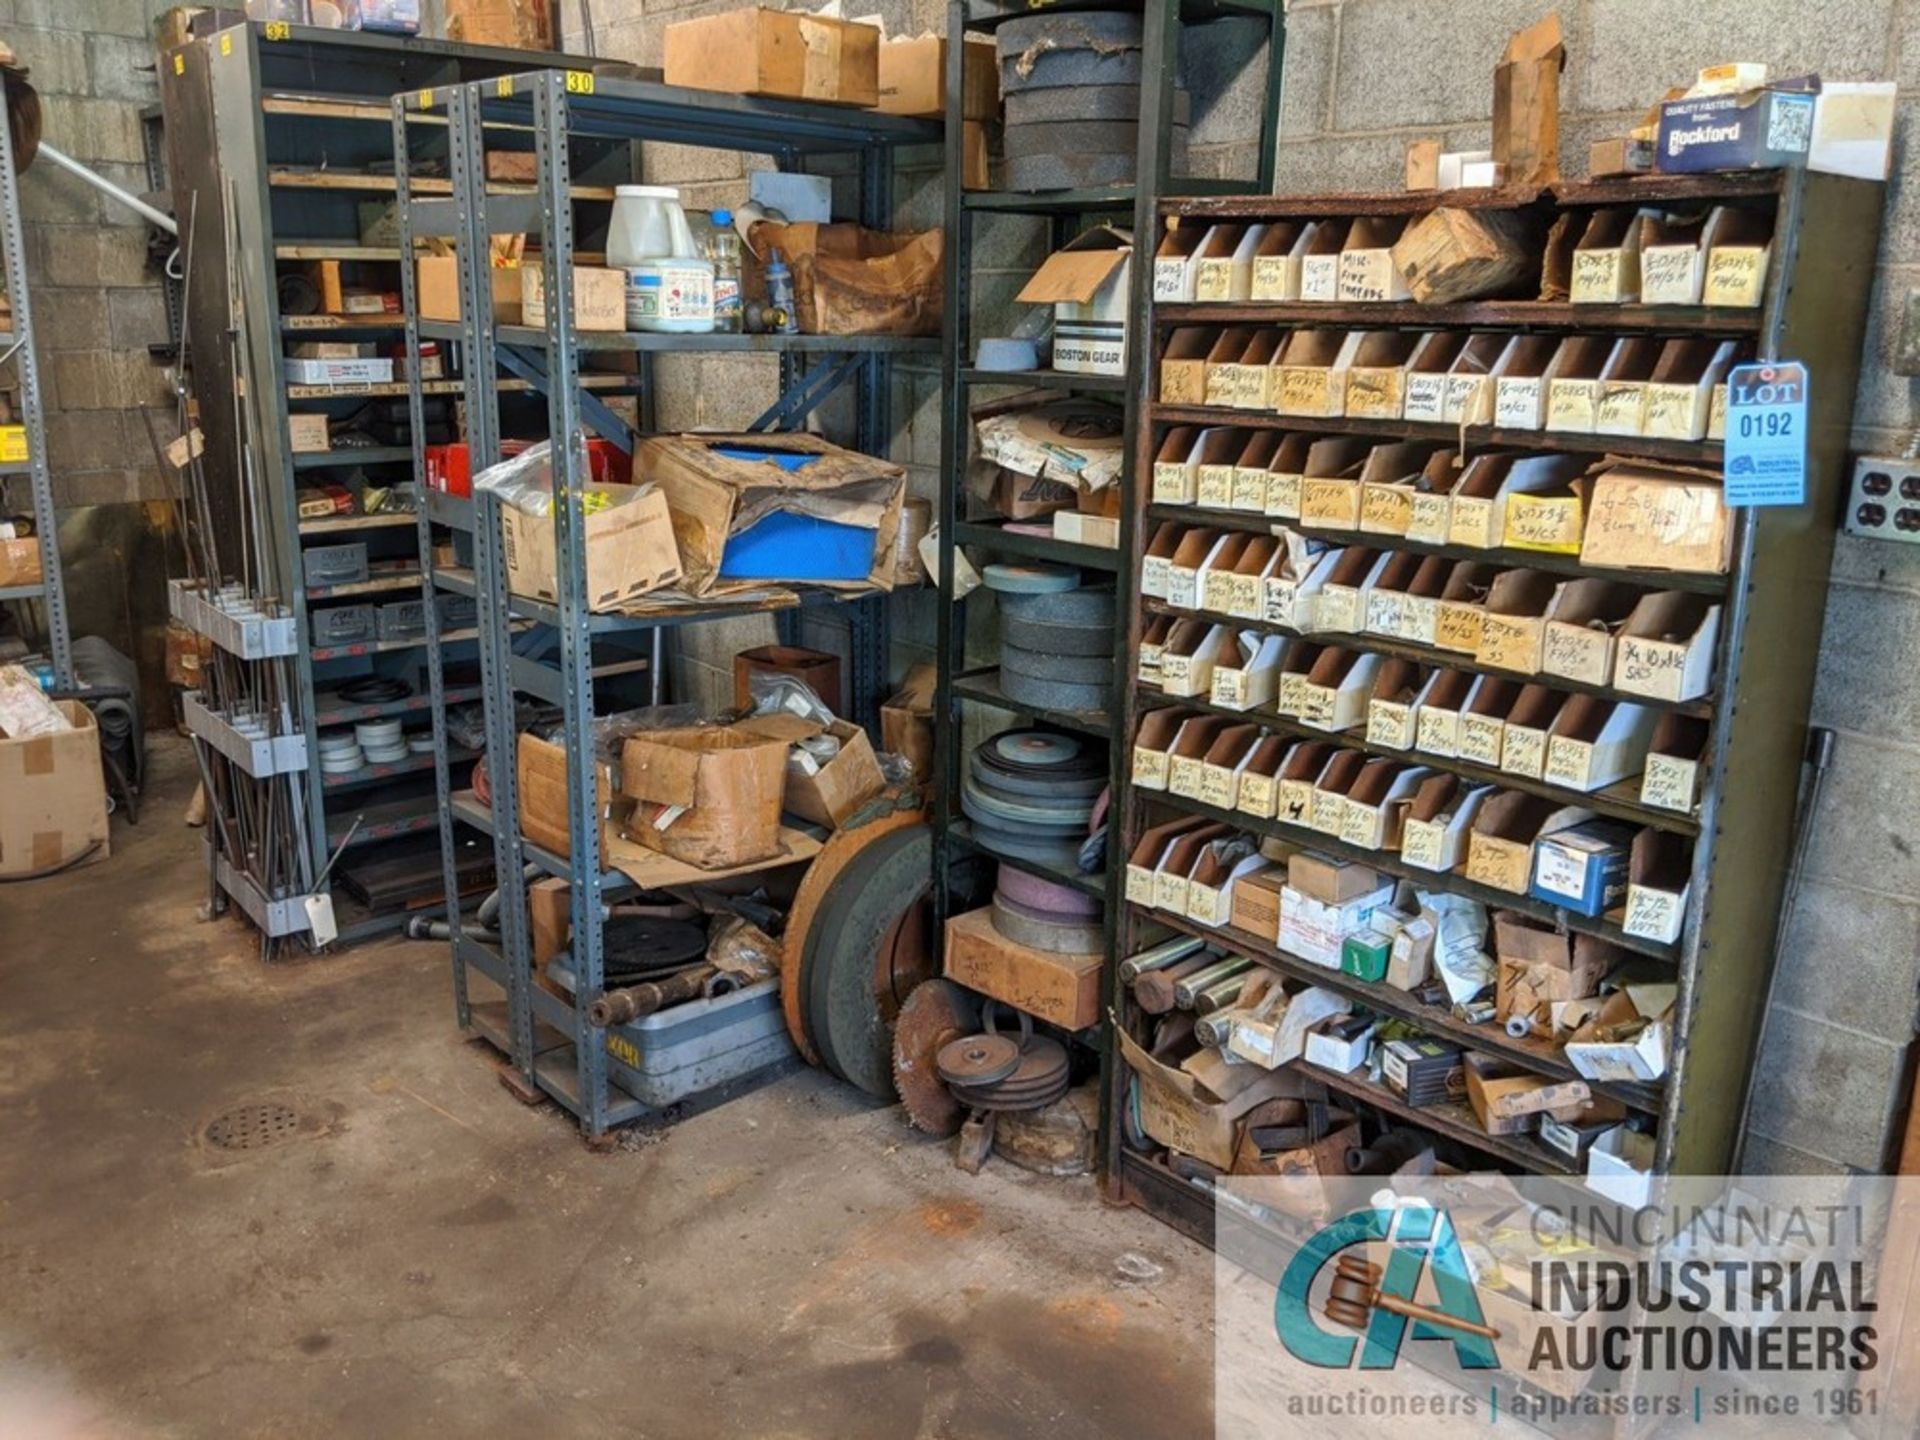 (LOT) CONTENTS OF ROOM: SHELVING UNITS WITH HARDWARE, GRINDING WHEELS, ALL THREAD, MACHINE PARTS,